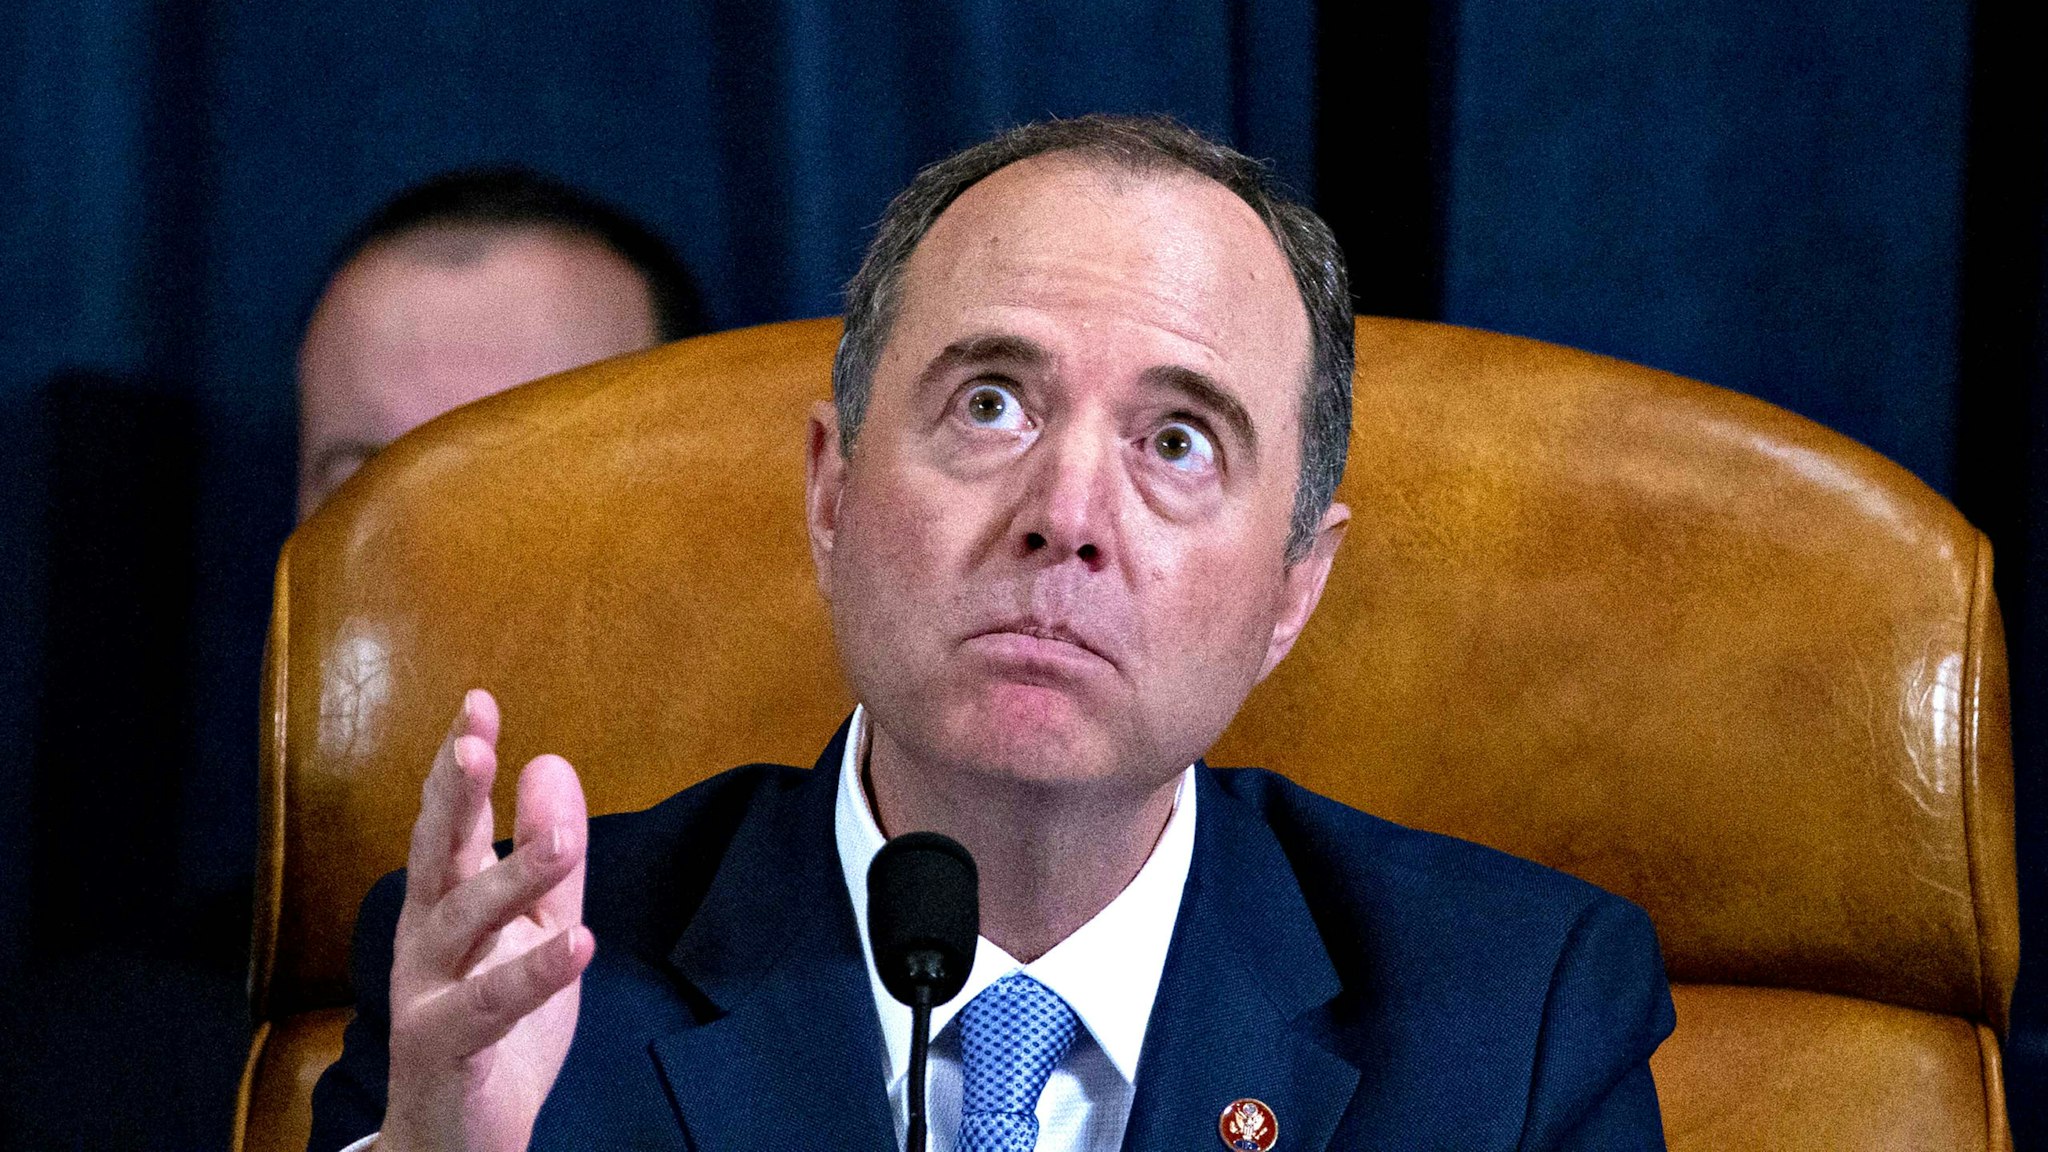 Representative Adam Schiff, a Democrat from California and chairman of the House Intelligence Committee, makes a closing statement during an impeachment inquiry hearing in Washington, D.C., U.S., on Thursday, Nov. 21, 2019. The committee hears from nine witnesses in open hearings this week in the impeachment inquiry into President Donald Trump.